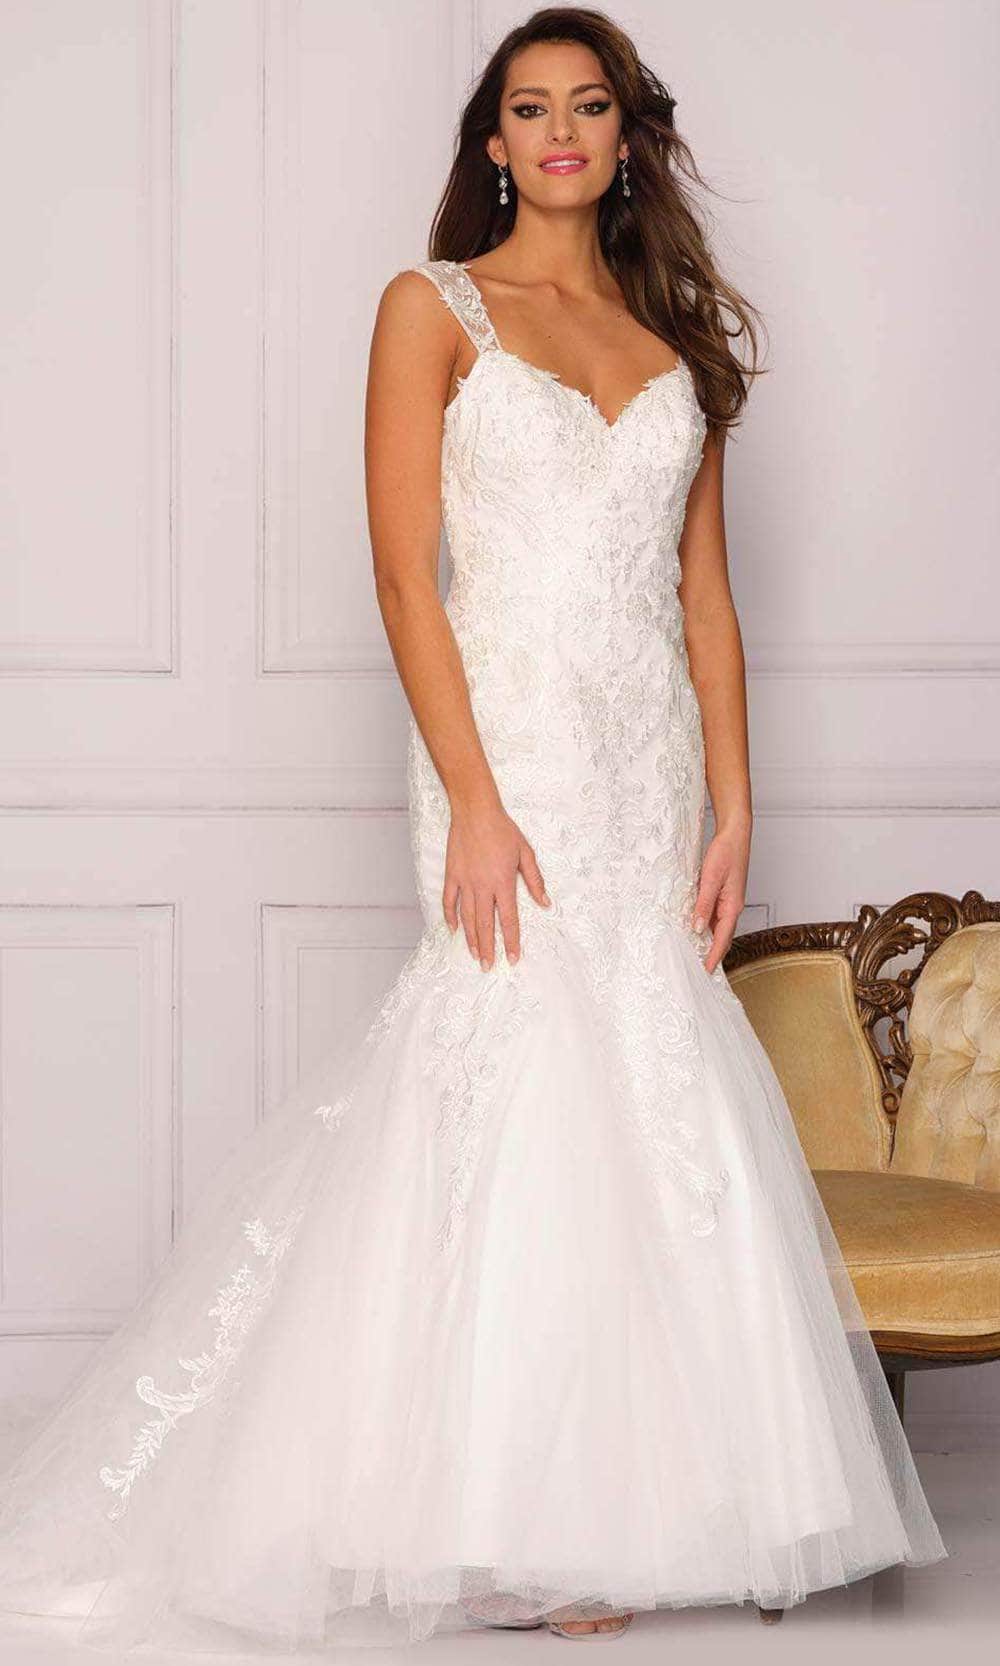 Dave & Johnny Bridal A10489 - Tulle Trumpet Skirt Bridal Gown
